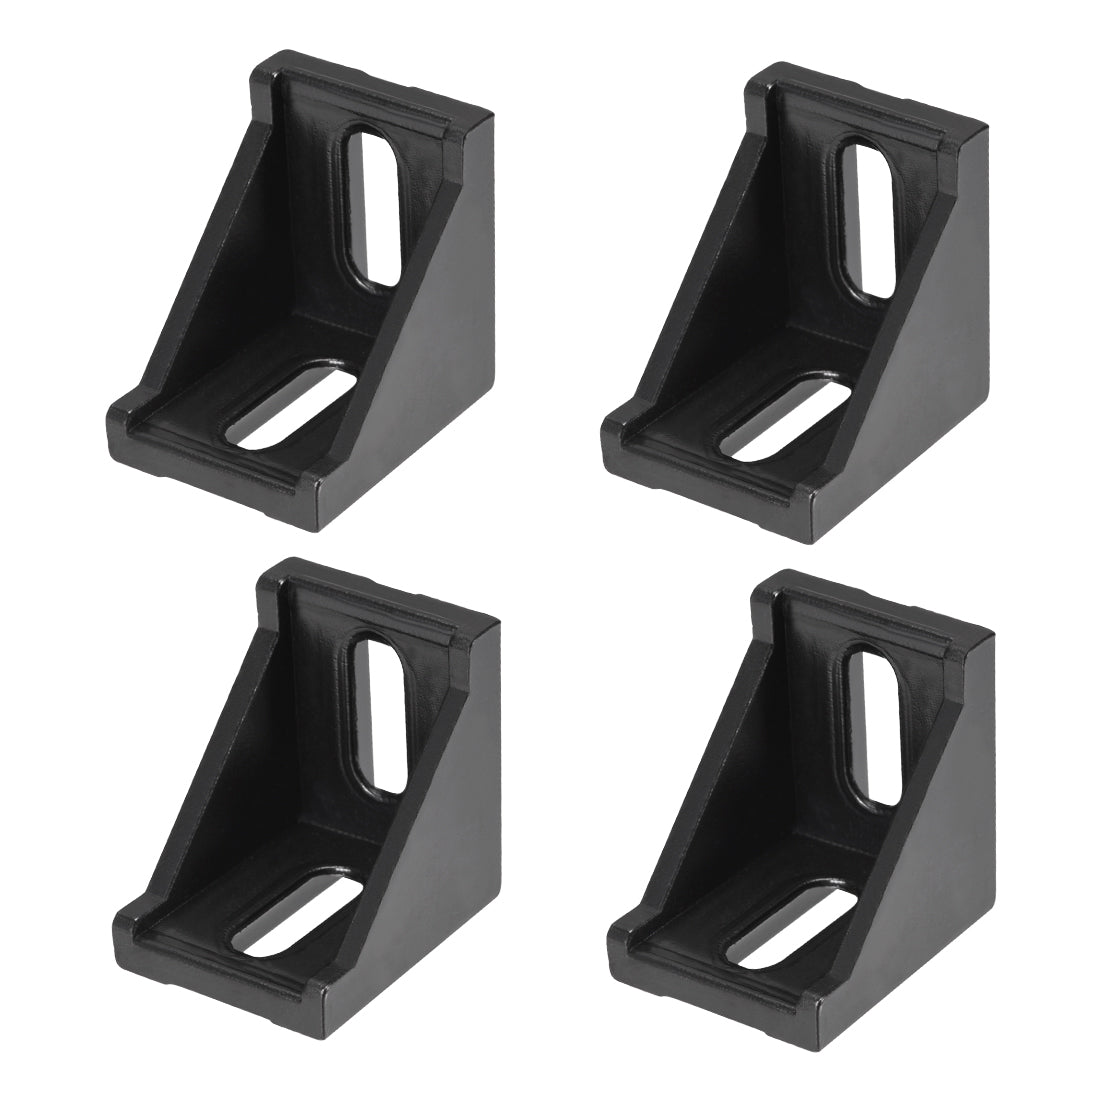 uxcell Uxcell Inside Corner Bracket Gusset, 35mm x 35mm for 3030 Series Aluminum Extrusion Profile with Slot 8mm, 4 Pcs (Black)